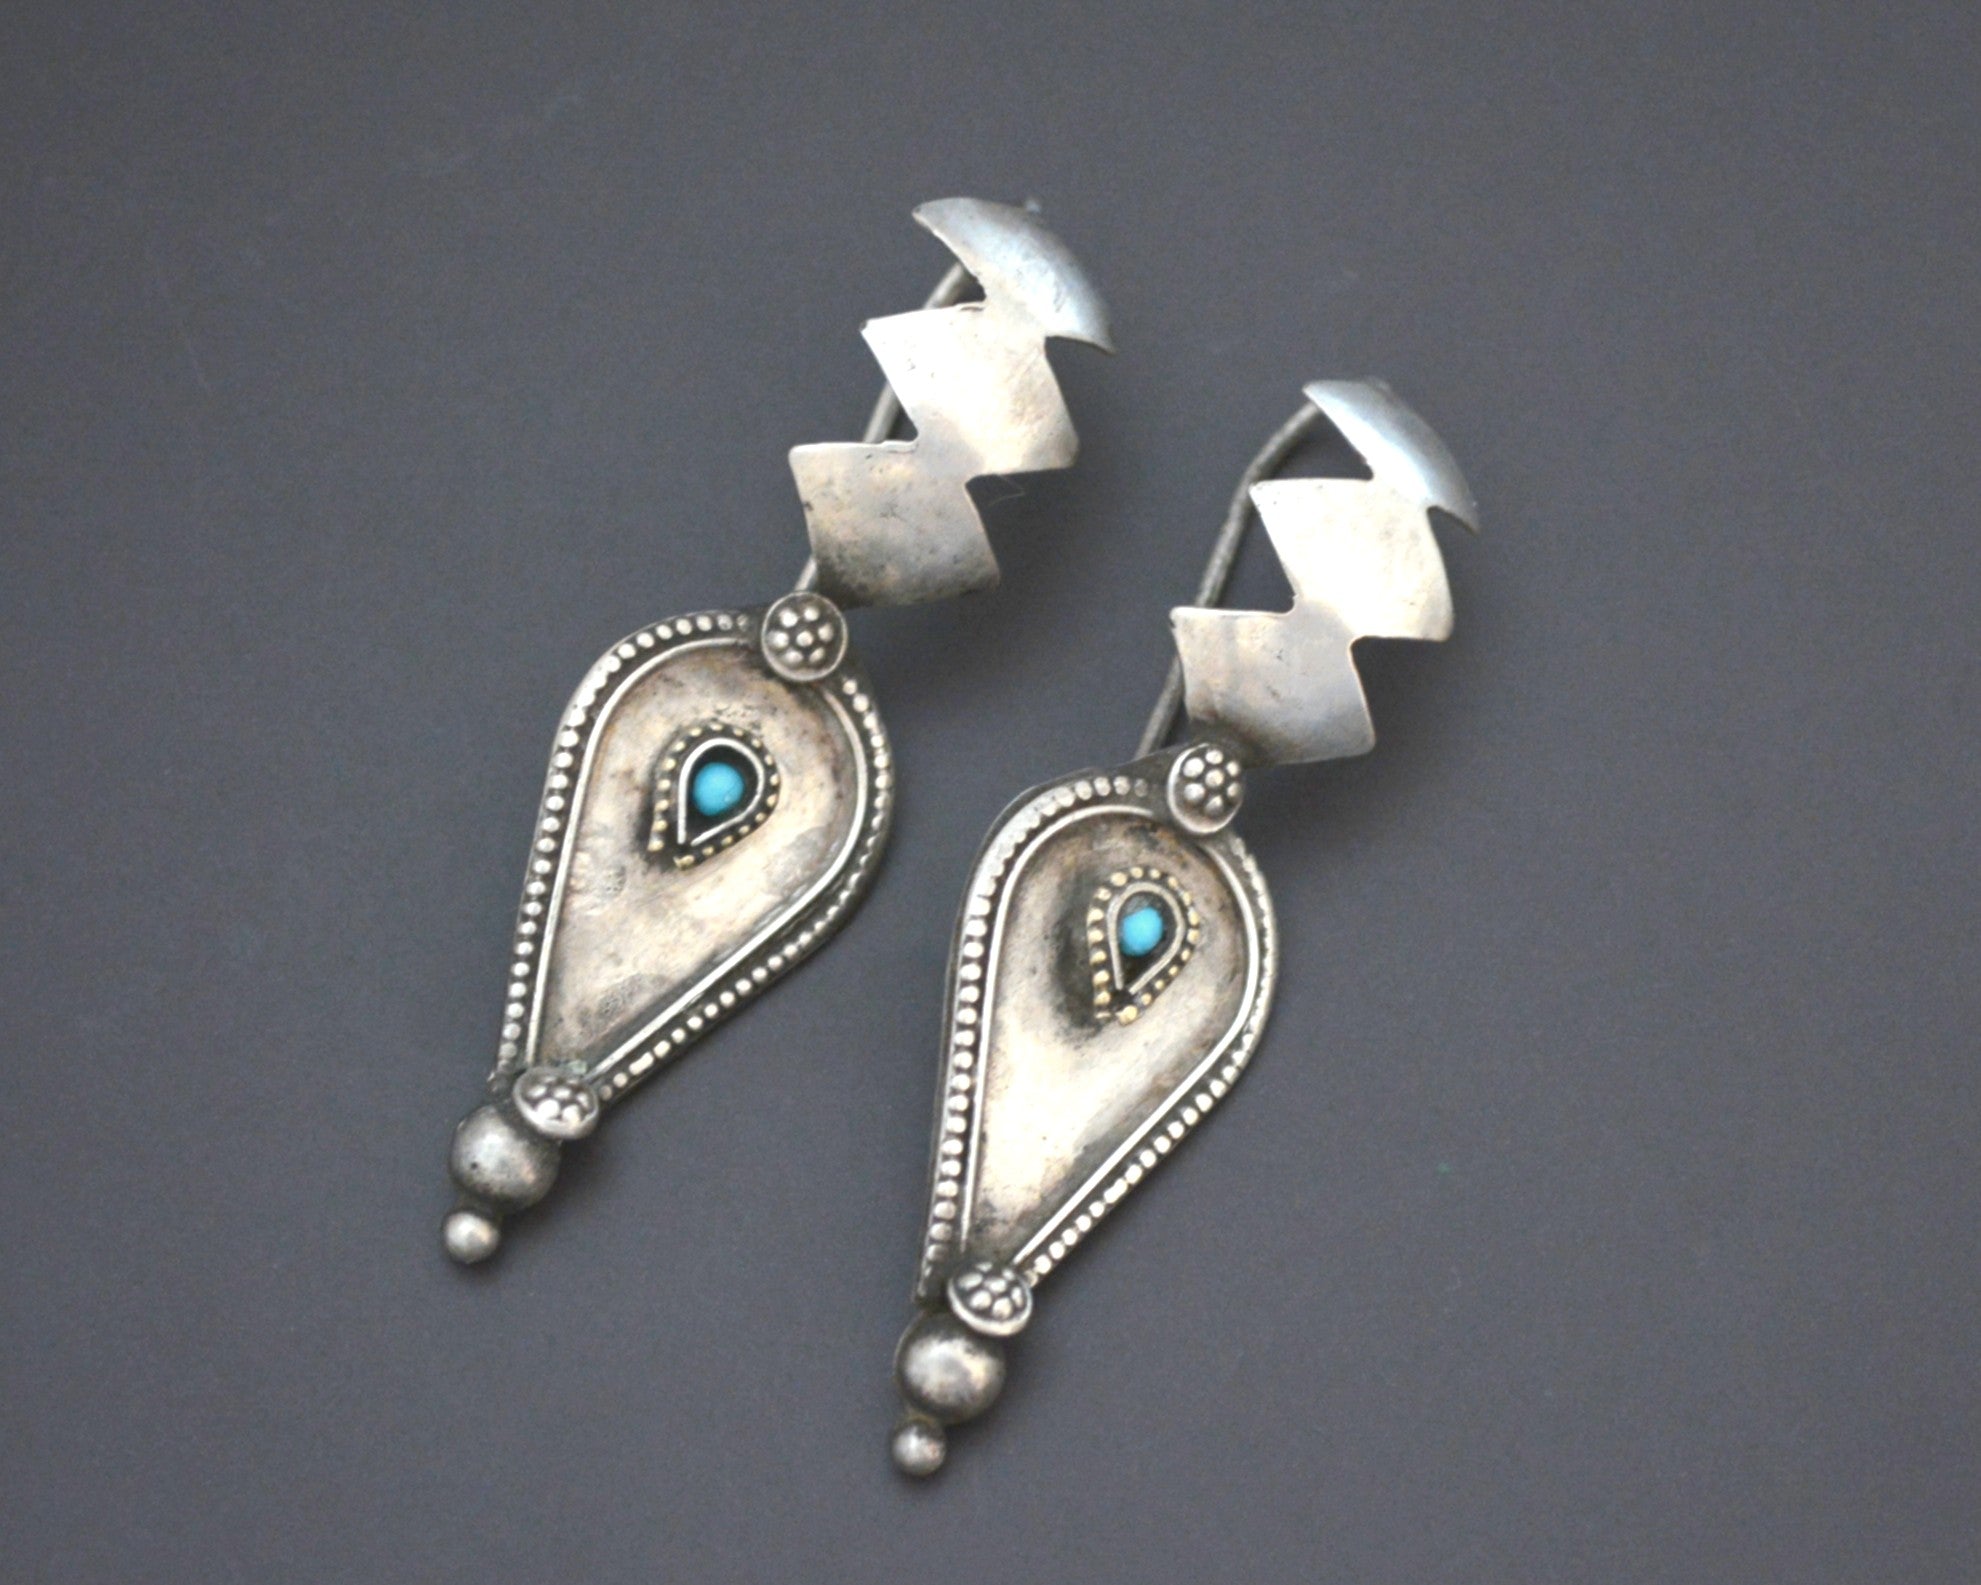 Afghani Earrings with Turquoise